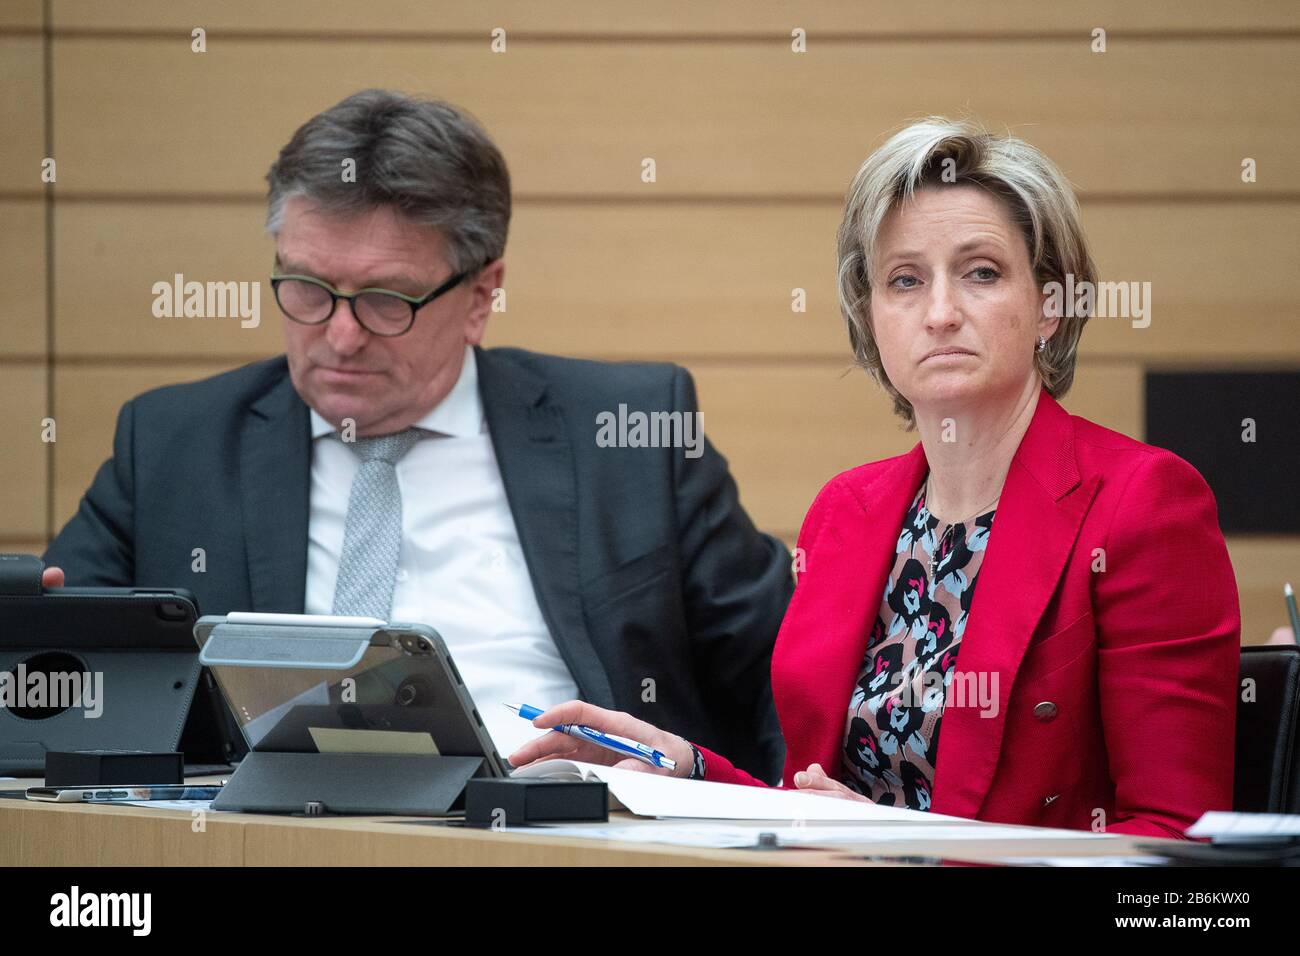 11 March 2020, Baden-Wuerttemberg, Stuttgart: Manfred Lucha (Bündnis 90/Die Grünen), Minister of Health of Baden-Württemberg, and Nicole Hoffmeister-Kraut (CDU), Minister of Economics, Labour and Housing of Baden-Württemberg, will participate in the 113th plenary session of the 16th State Parliament of Baden-Württemberg. Topics included the effects of coronavirus on the economy of the state. Photo: Sebastian Gollnow/dpa Stock Photo